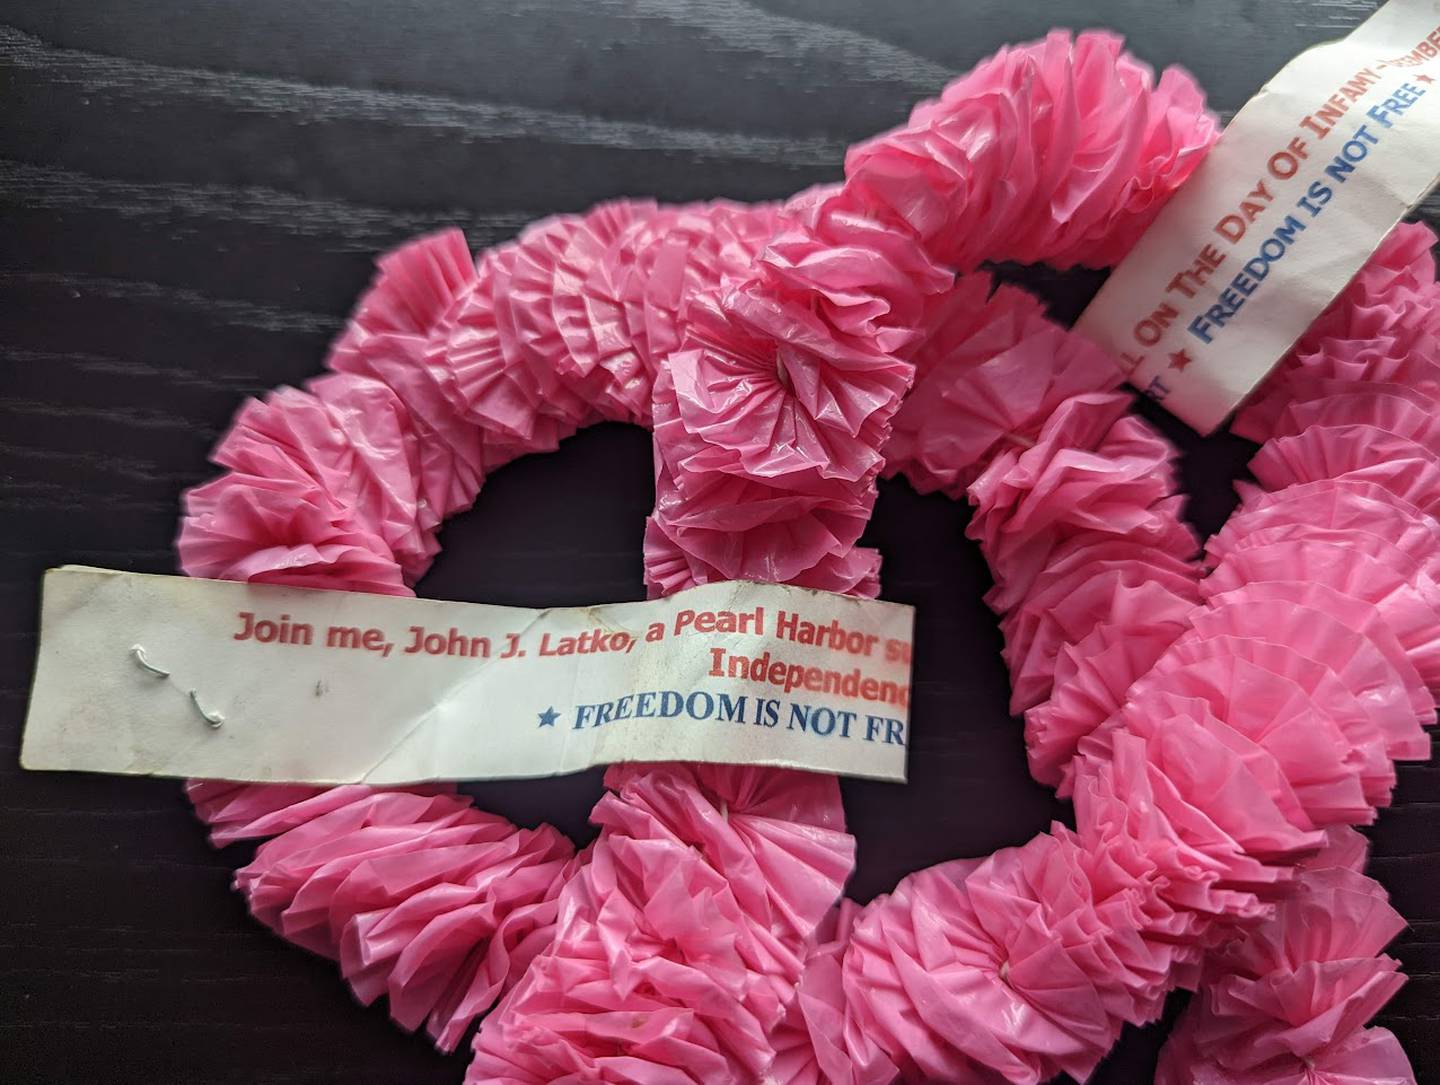 Through the years, John Latko attended Pearl Harbor-related events and supported survivors. He was fond of distributing plastic leis to everyone at church with a Pearl Harbor memorial tag attached to it – so people would not forget. John Latko died in 2013 and a street in Hammond, Indiana, where he lived, was named for him.